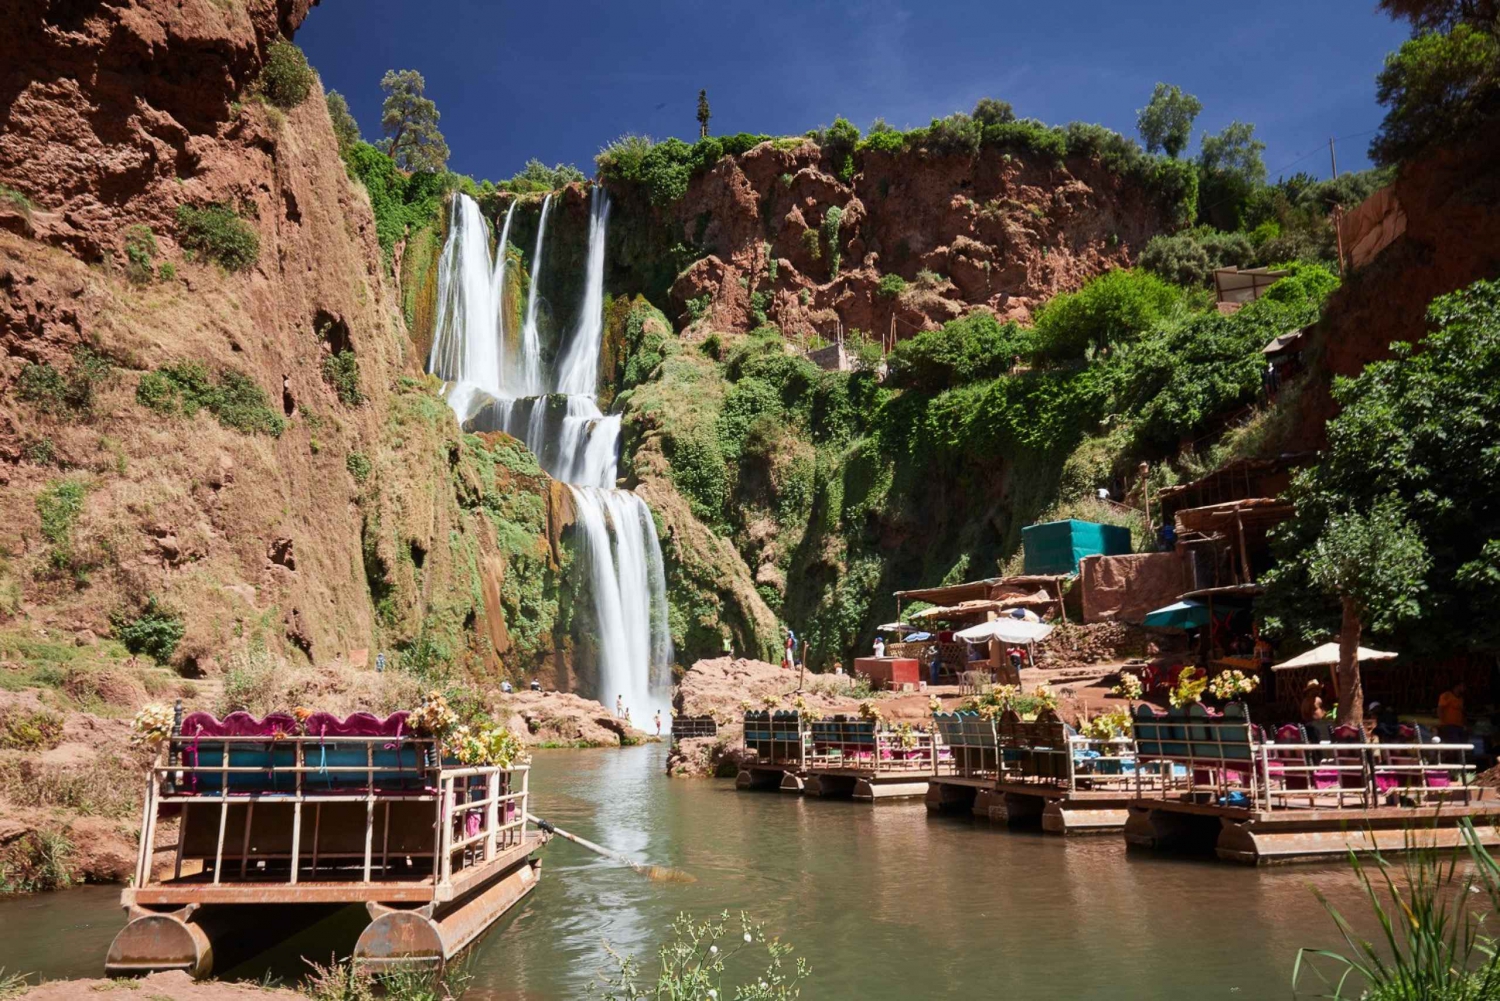 From Marrakech: Full-Day Tour to Ouzoud Falls with Boat Trip